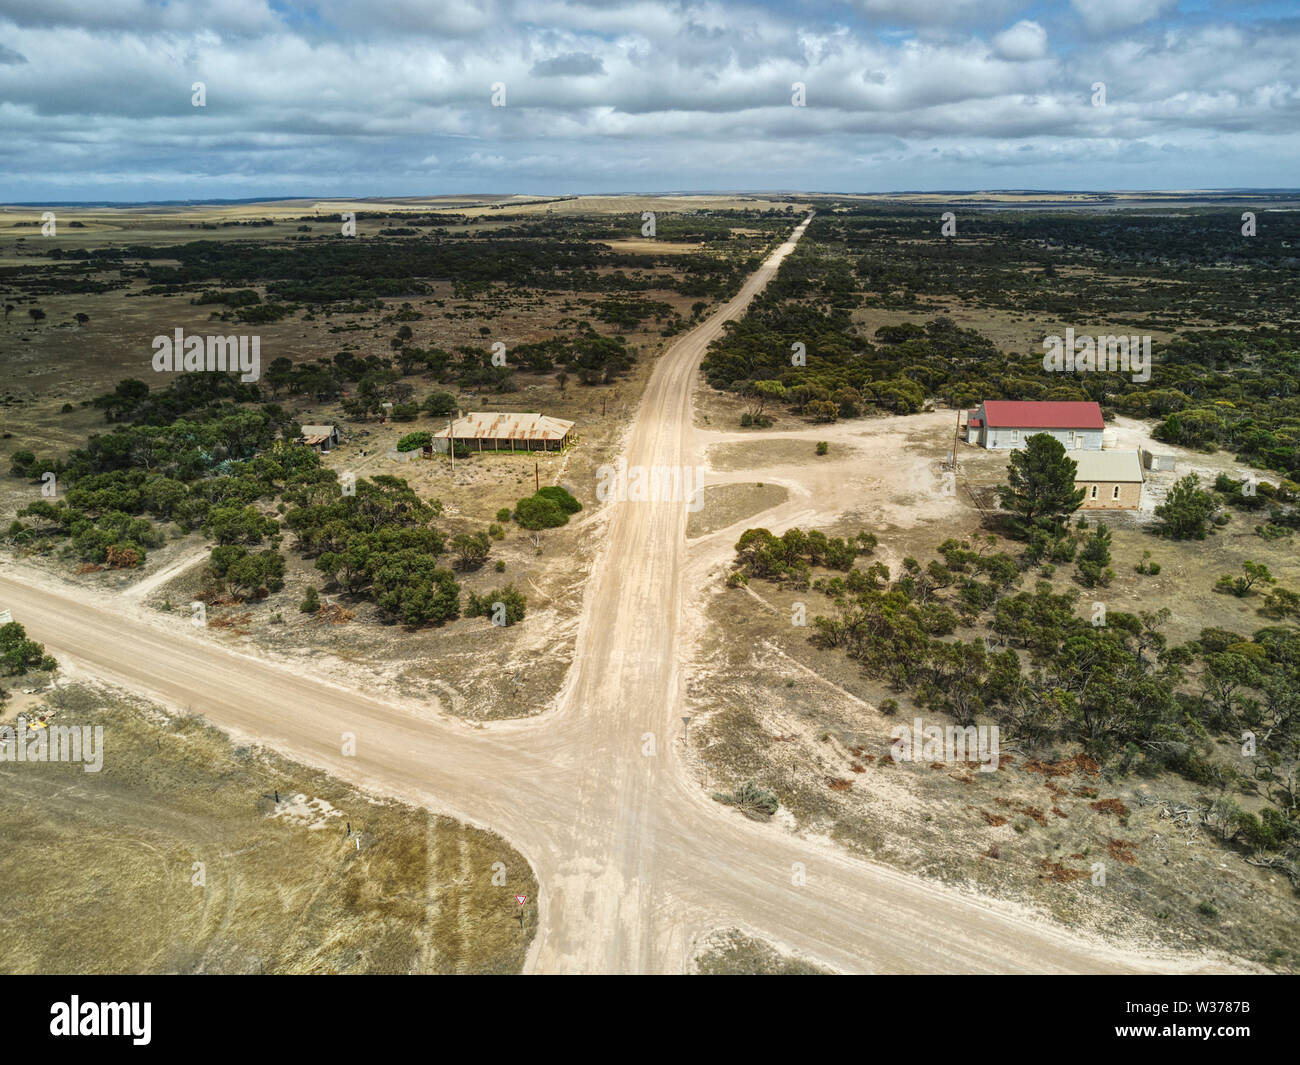 Aerial view of the almost deserted settlement of Calca Eyre Peninsula South Australia Stock Photo